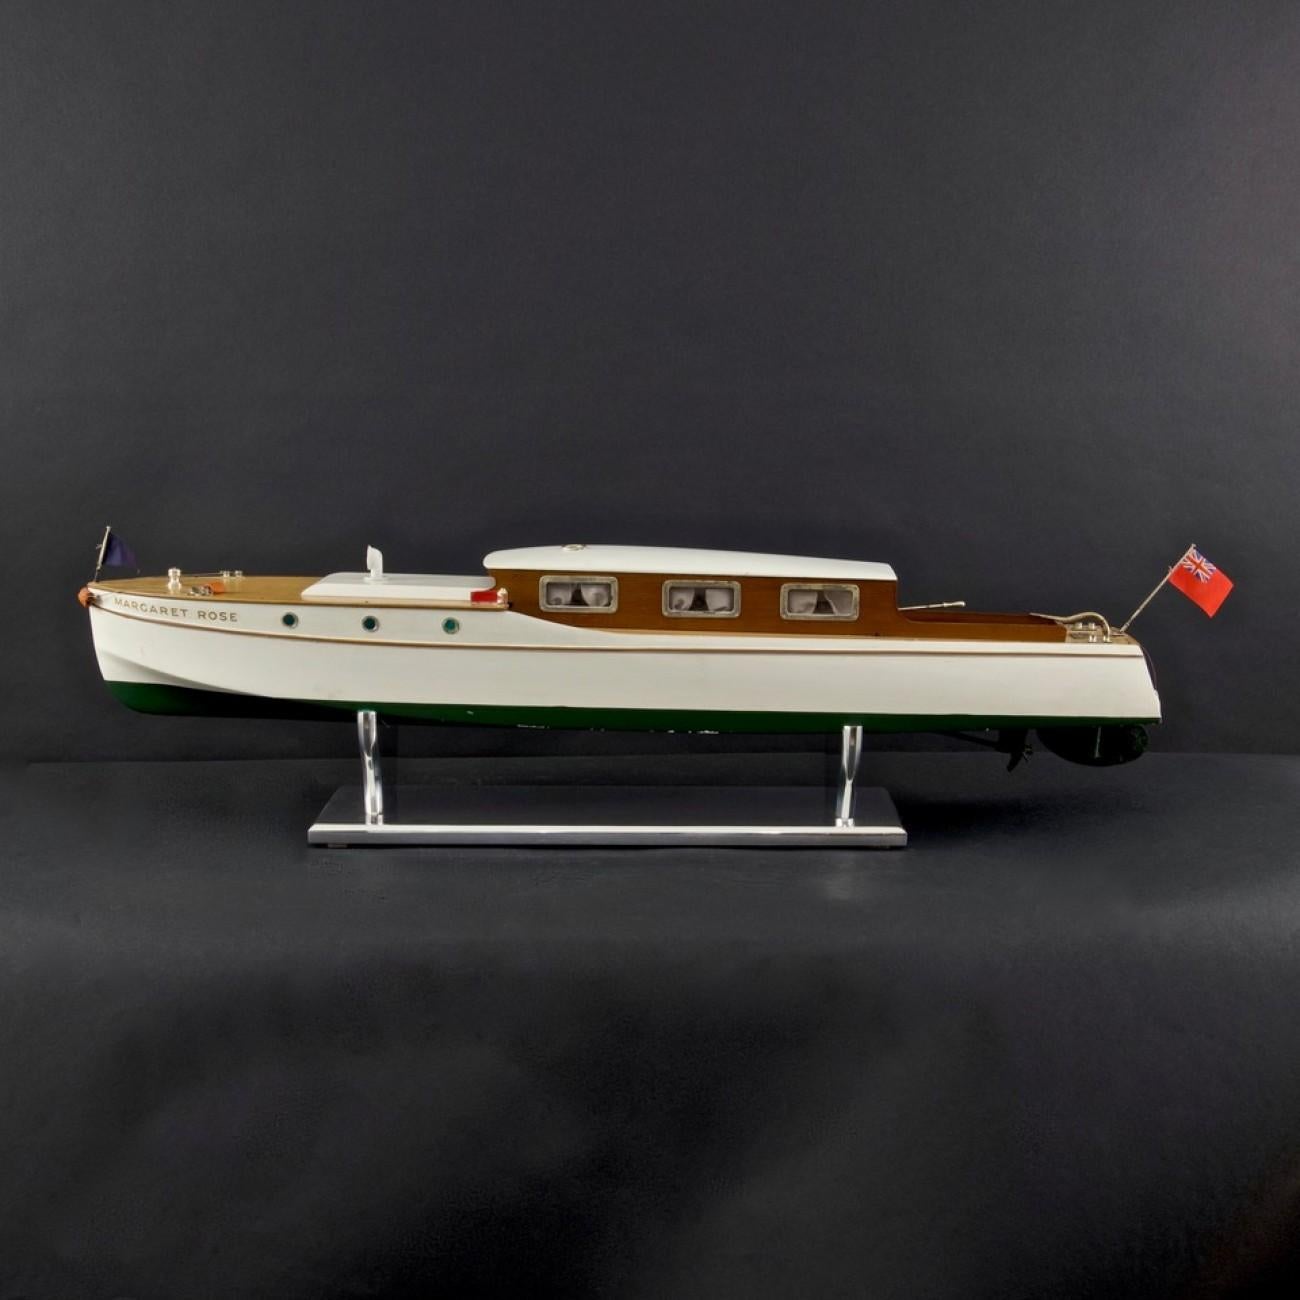 A rare 1930s clockwork model river launch/cabin cruiser ‘Margaret Rose’, so named following the birth of Princess Margaret in 1930. Made by Bassett-Lowke, with streamlined white and green painted wooden hull, light oak decking with a dark wood cabin